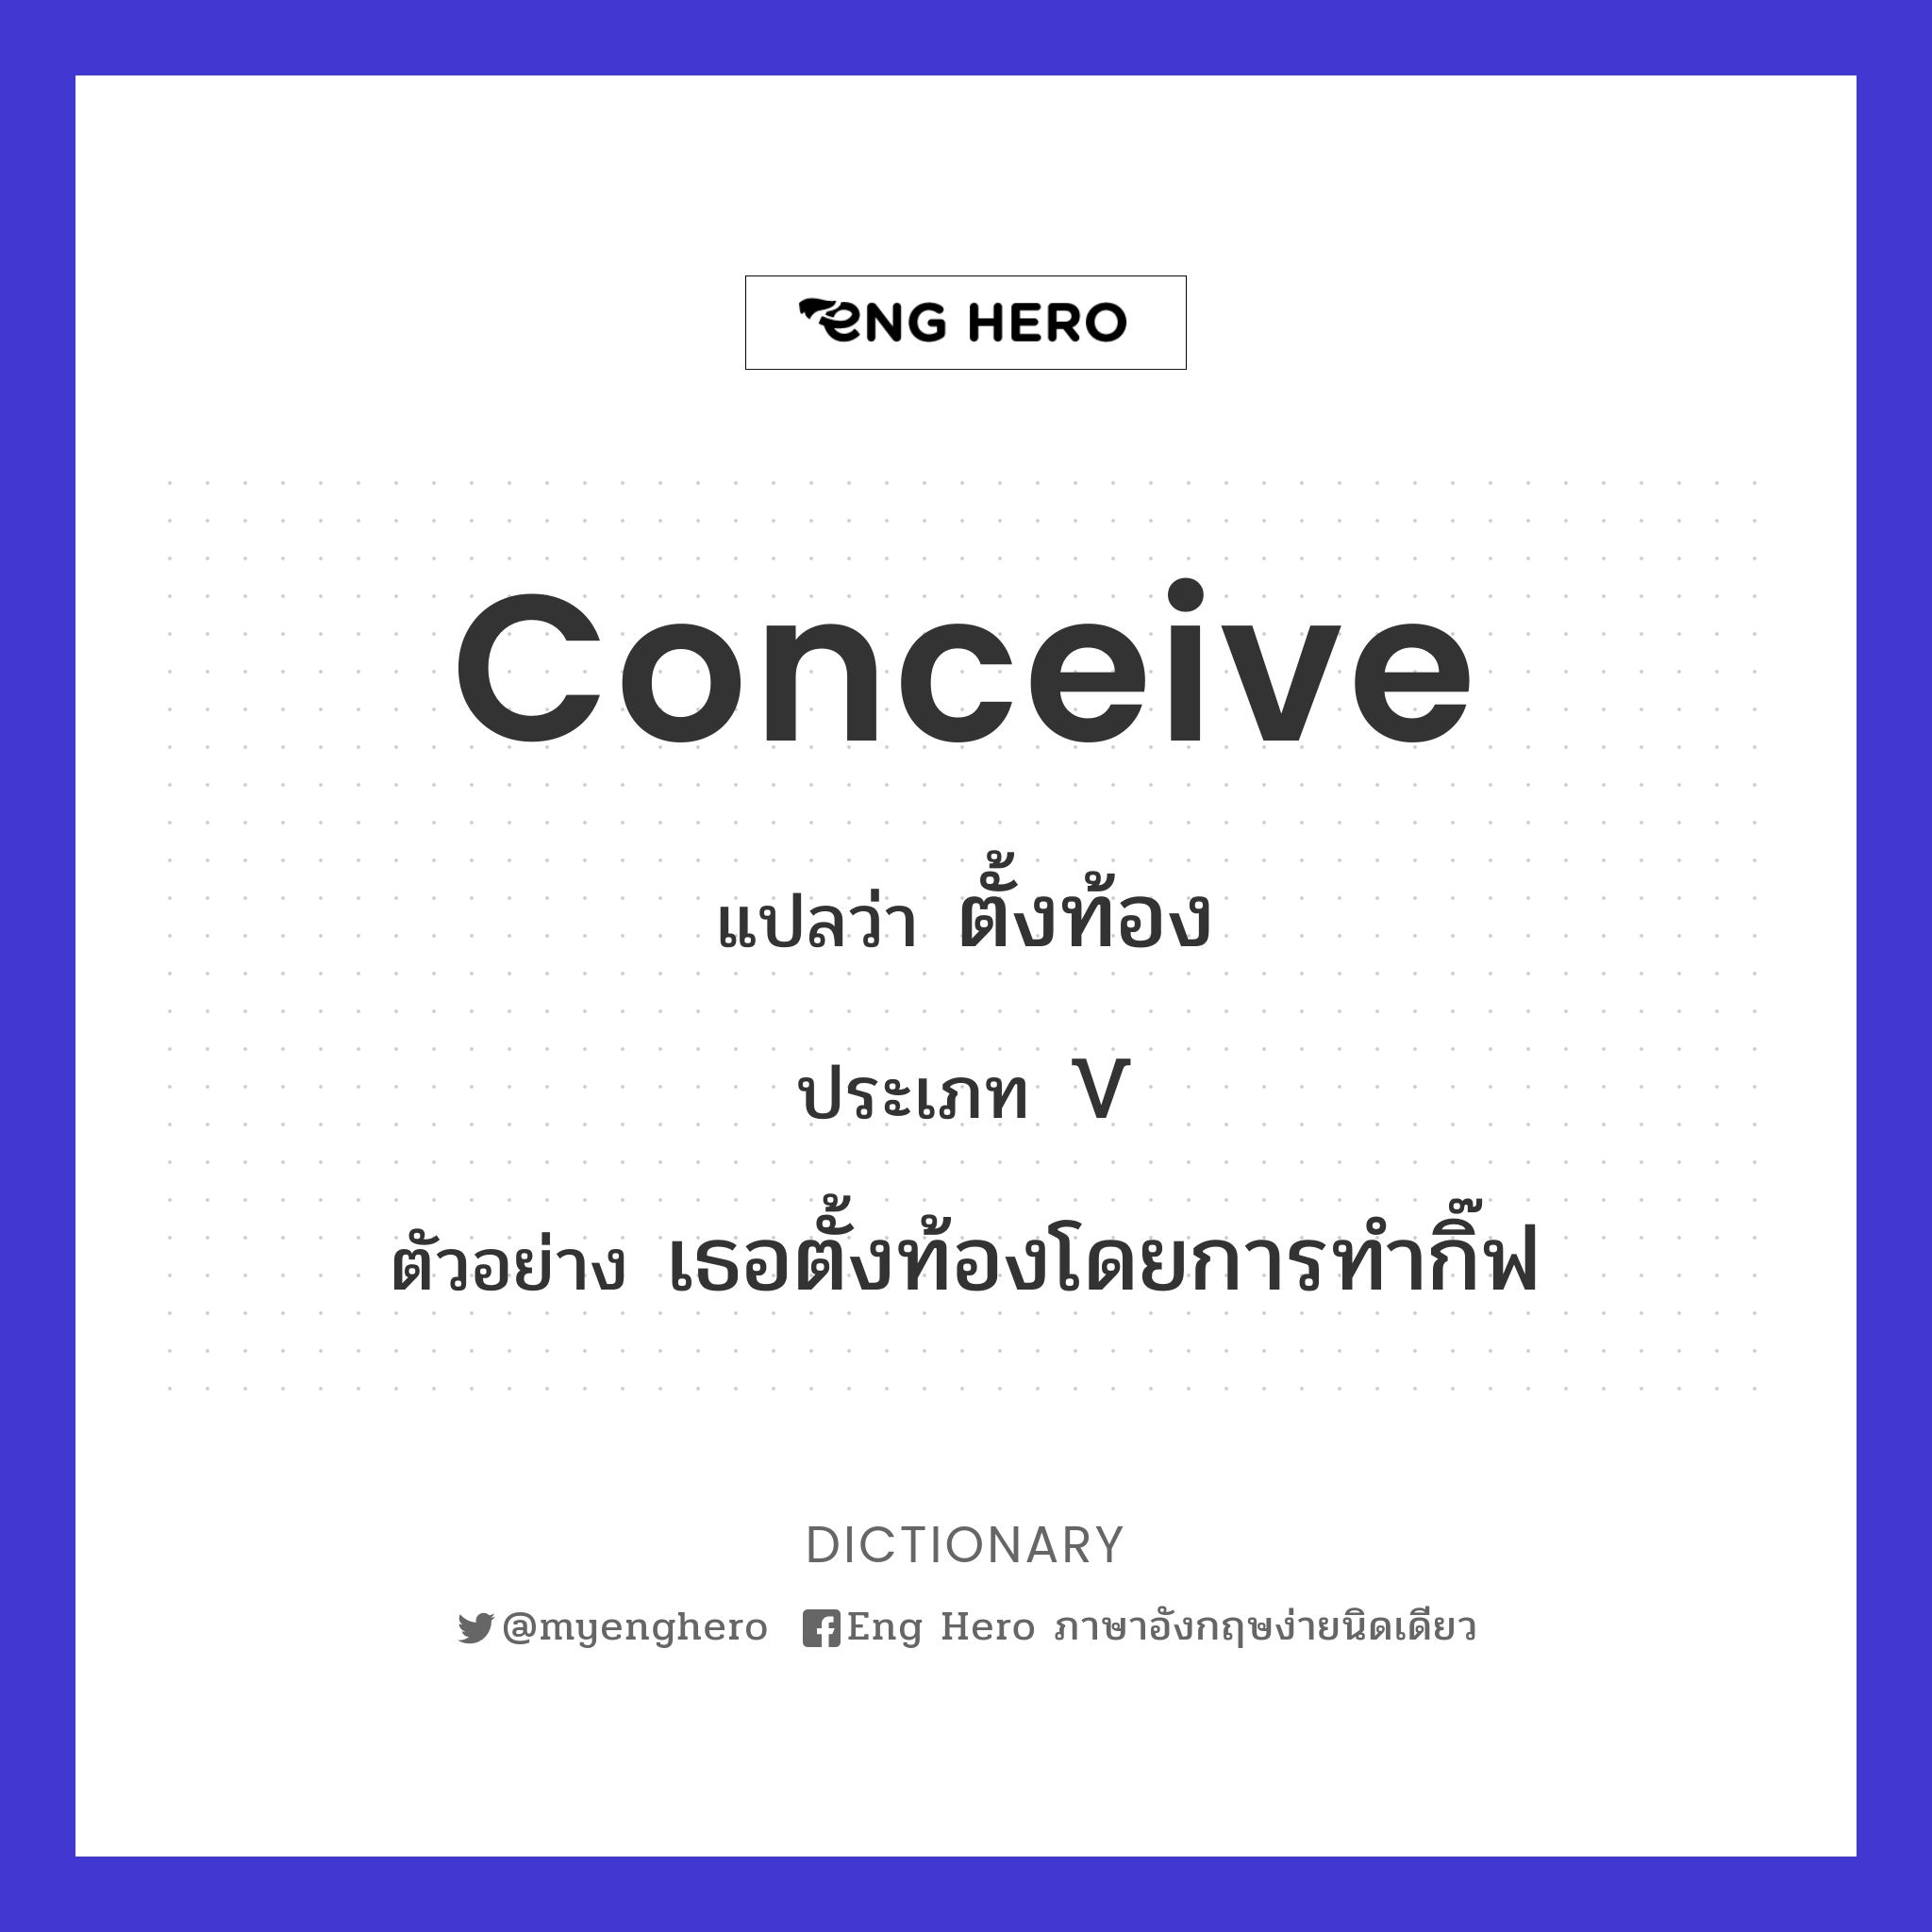 conceive